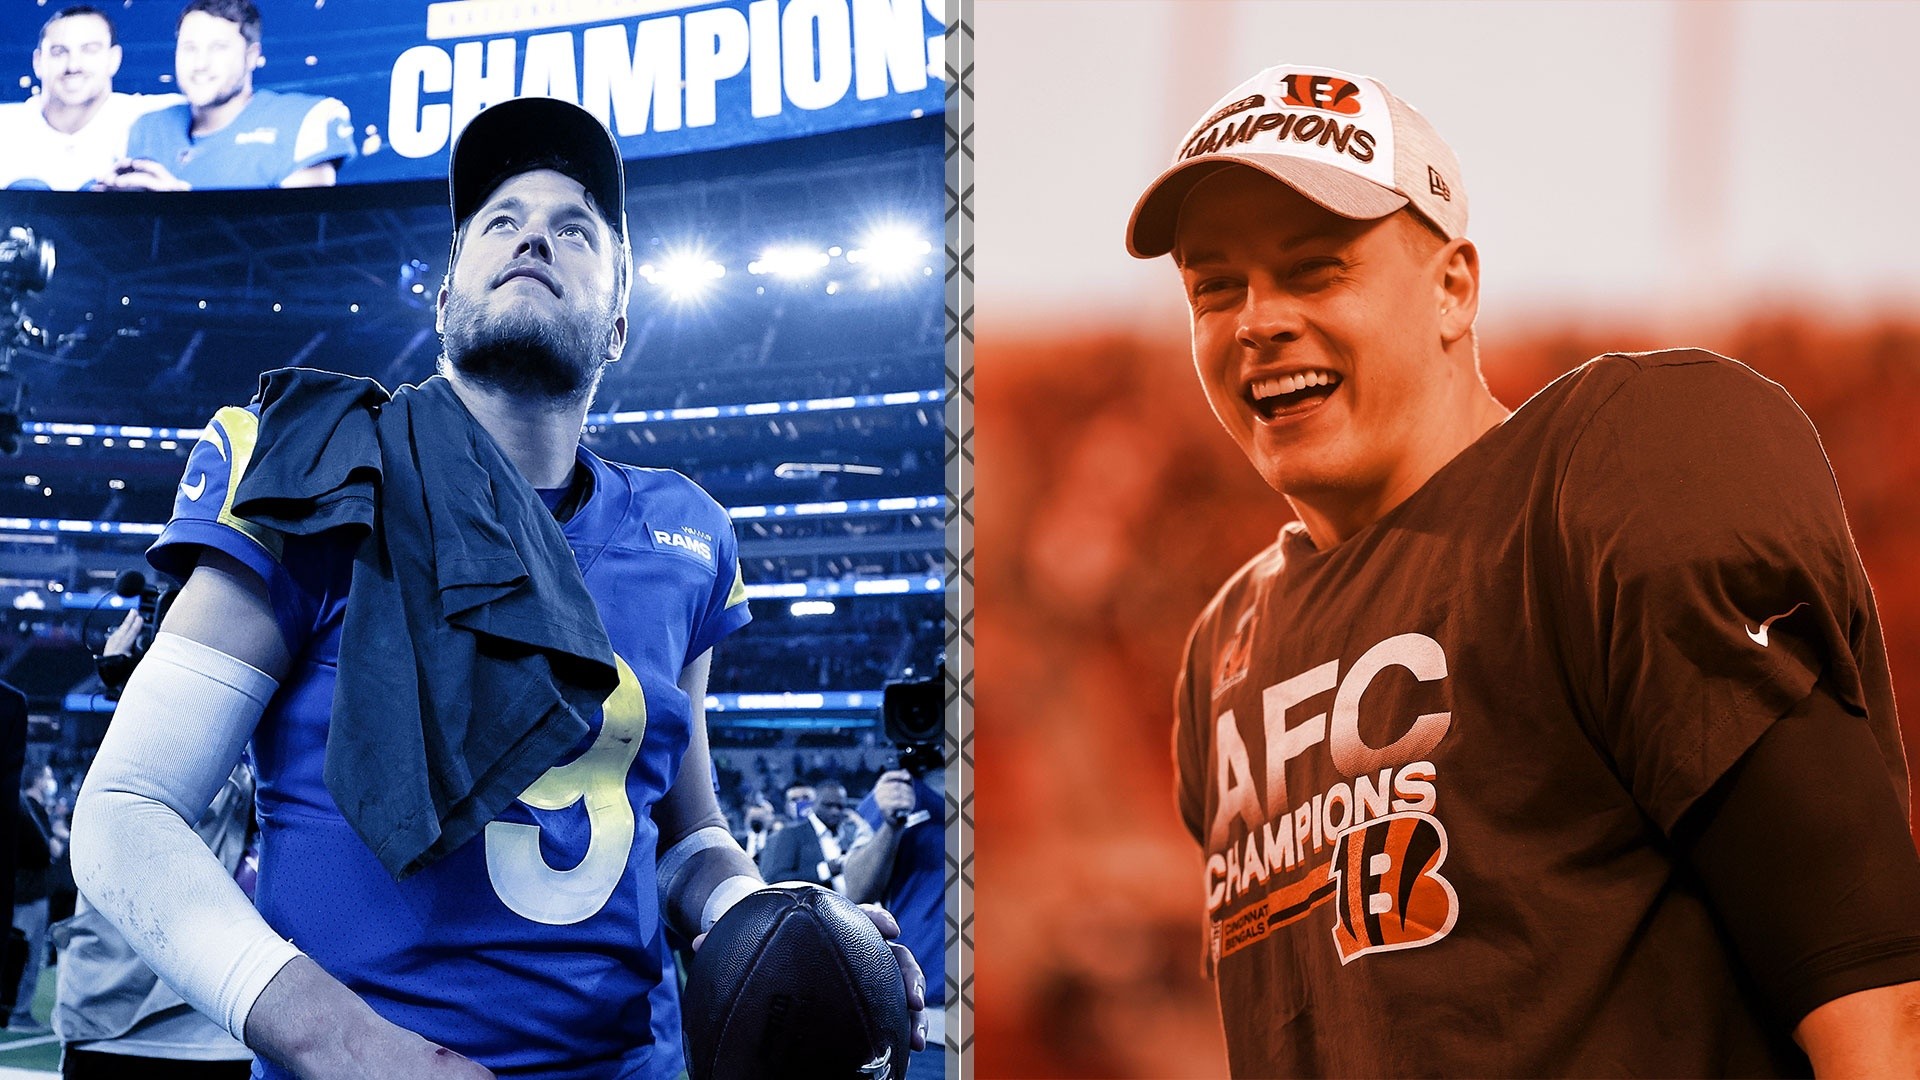 Sunday Night Football on NBC - The AFC Championship Game is set